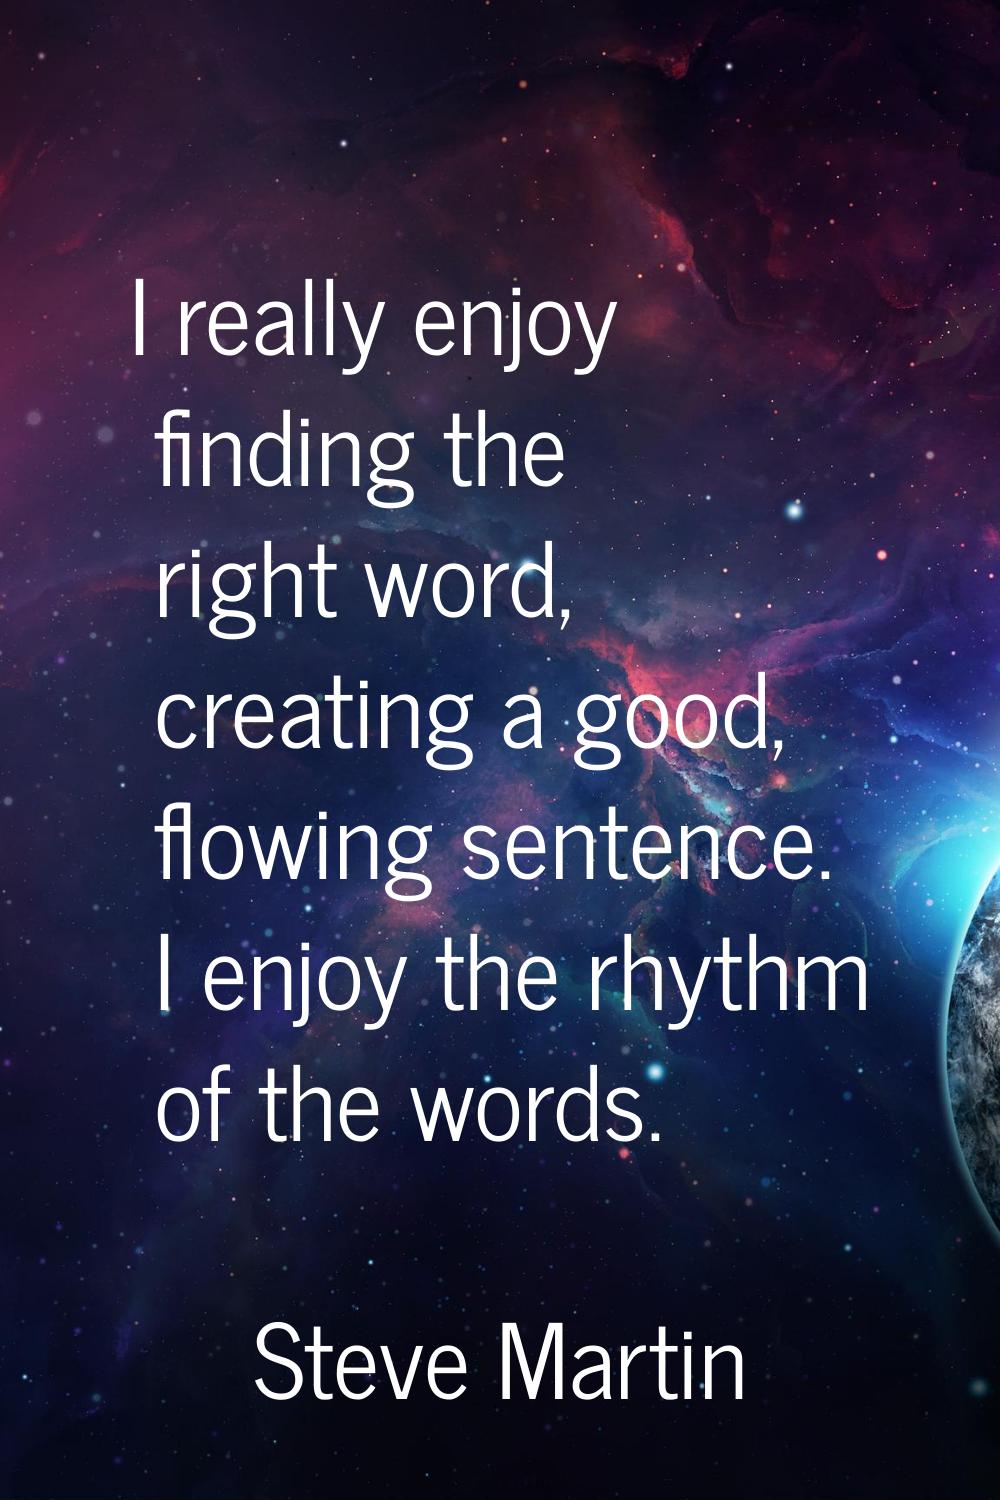 I really enjoy finding the right word, creating a good, flowing sentence. I enjoy the rhythm of the